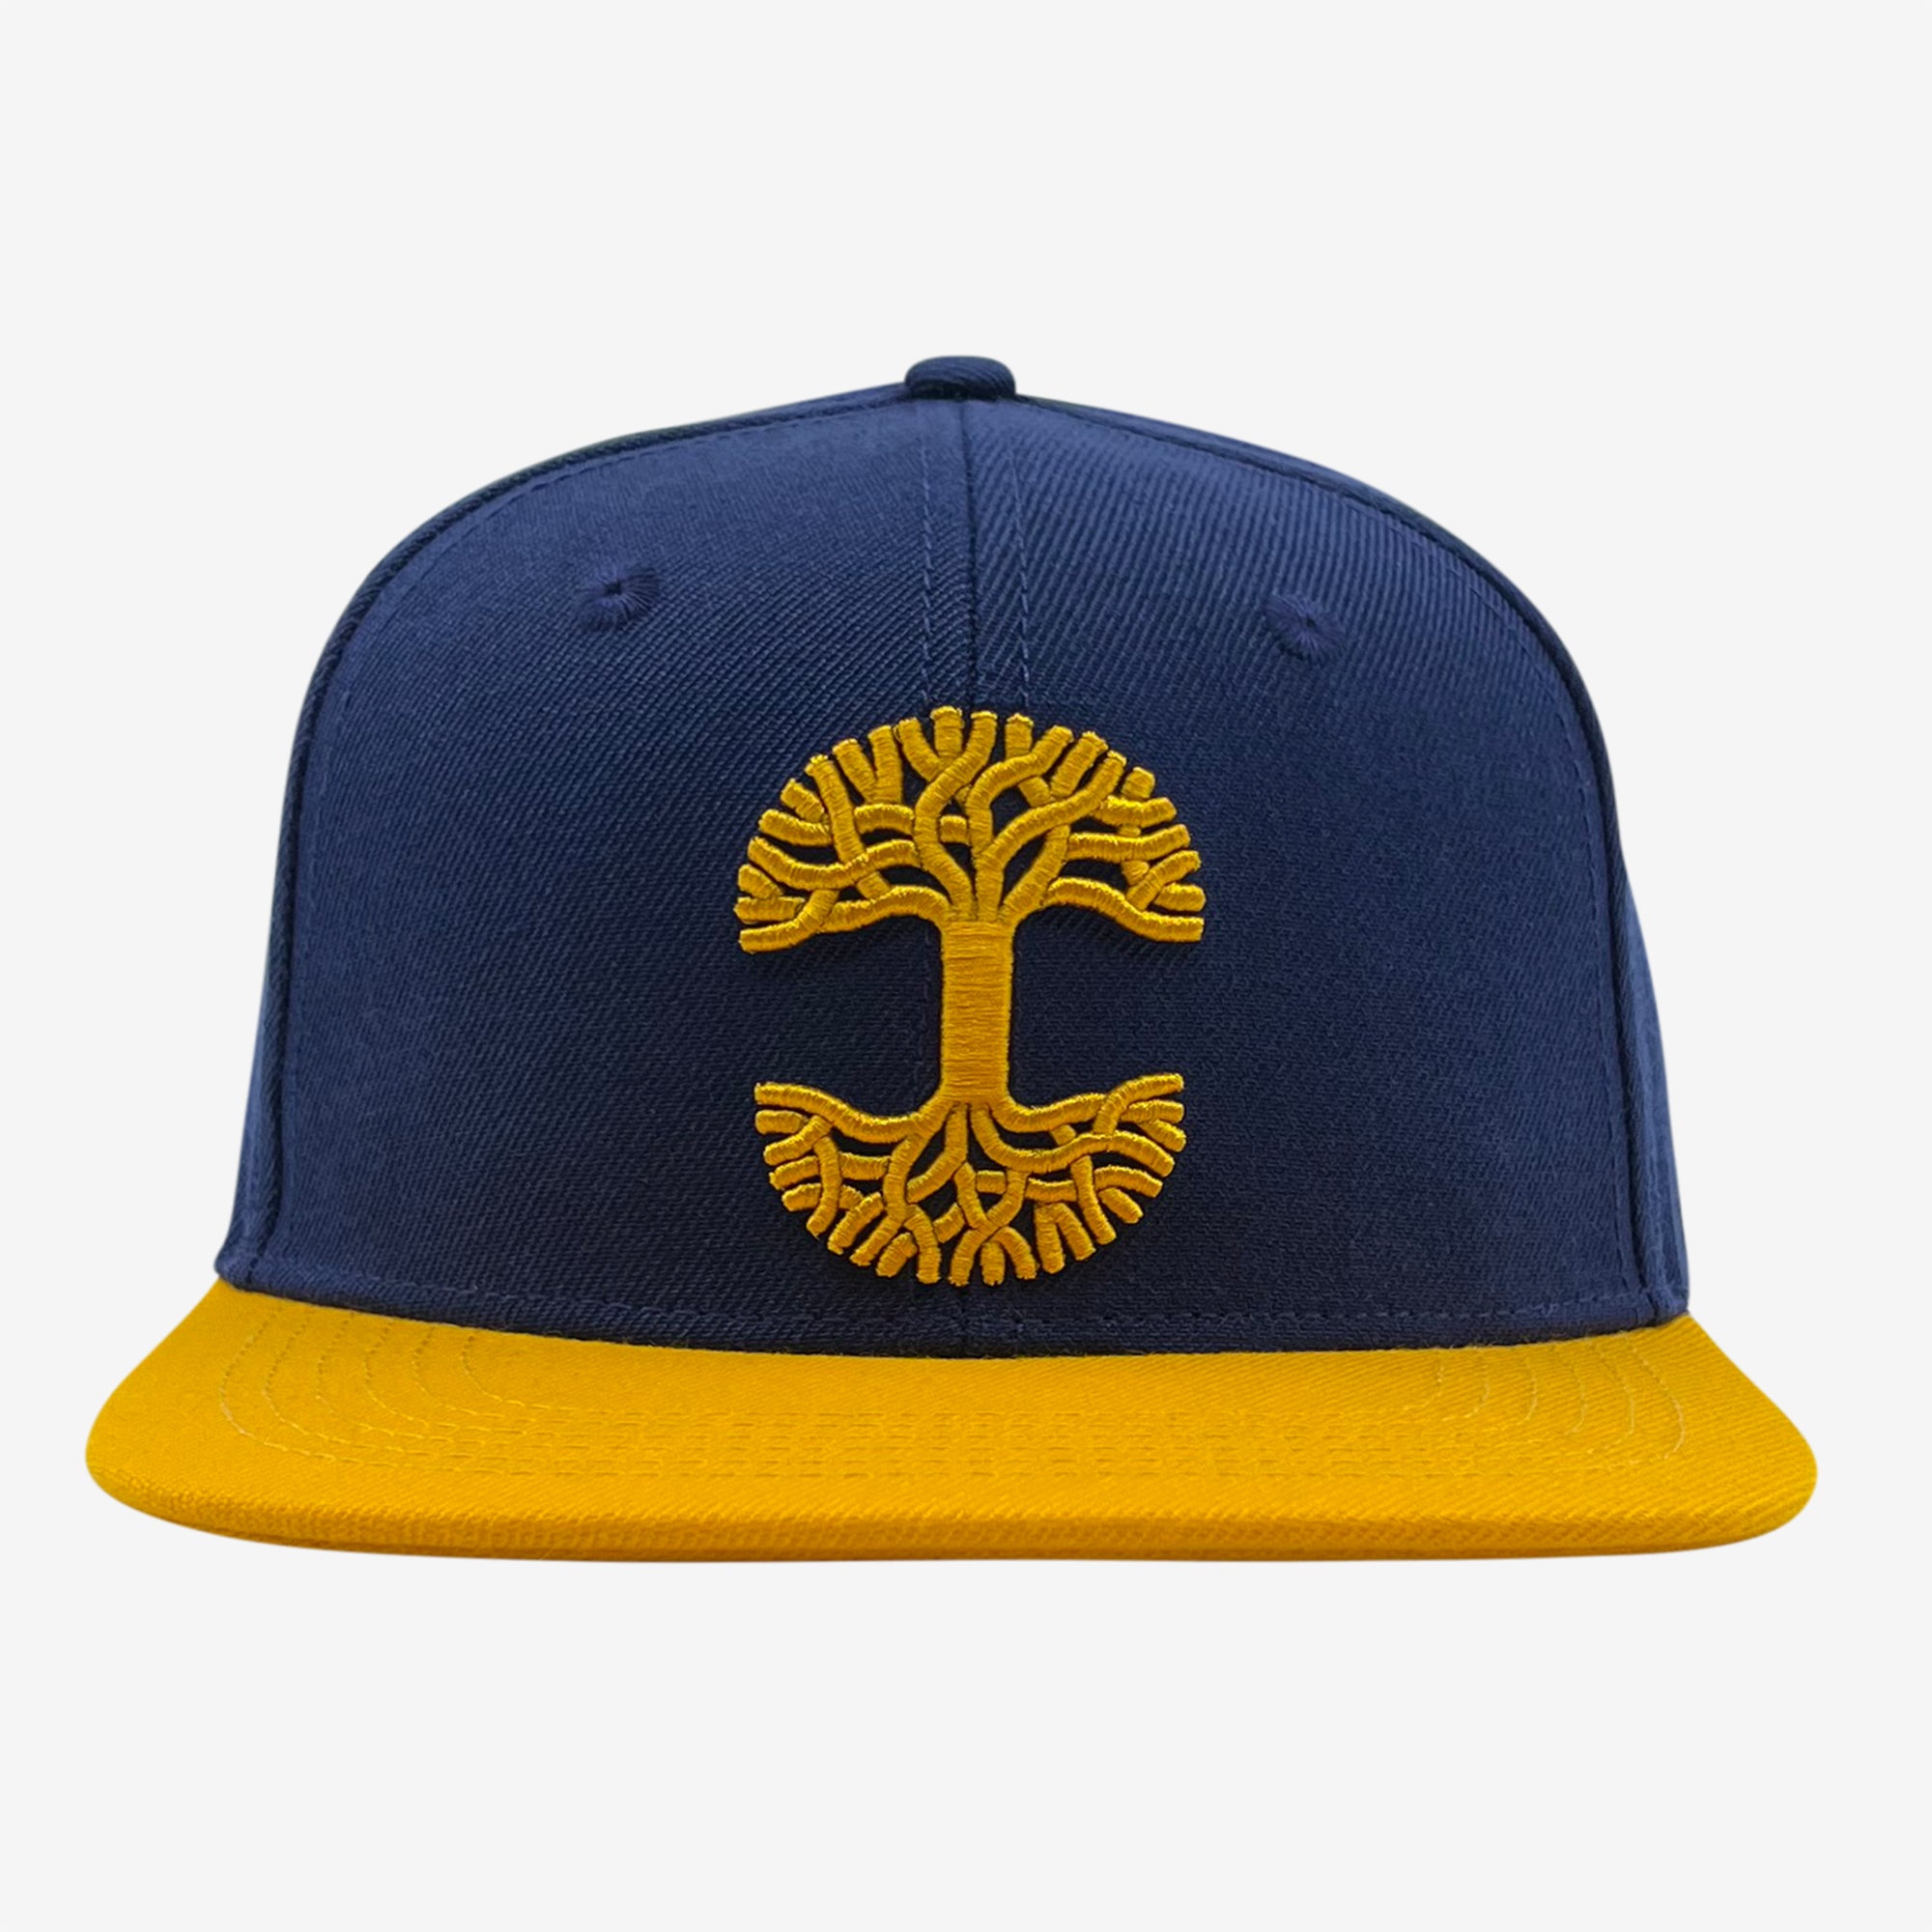 Royal blue snapback hat with yellow embroidered Oaklandish tree logo on crown and contrasting yellow visor.